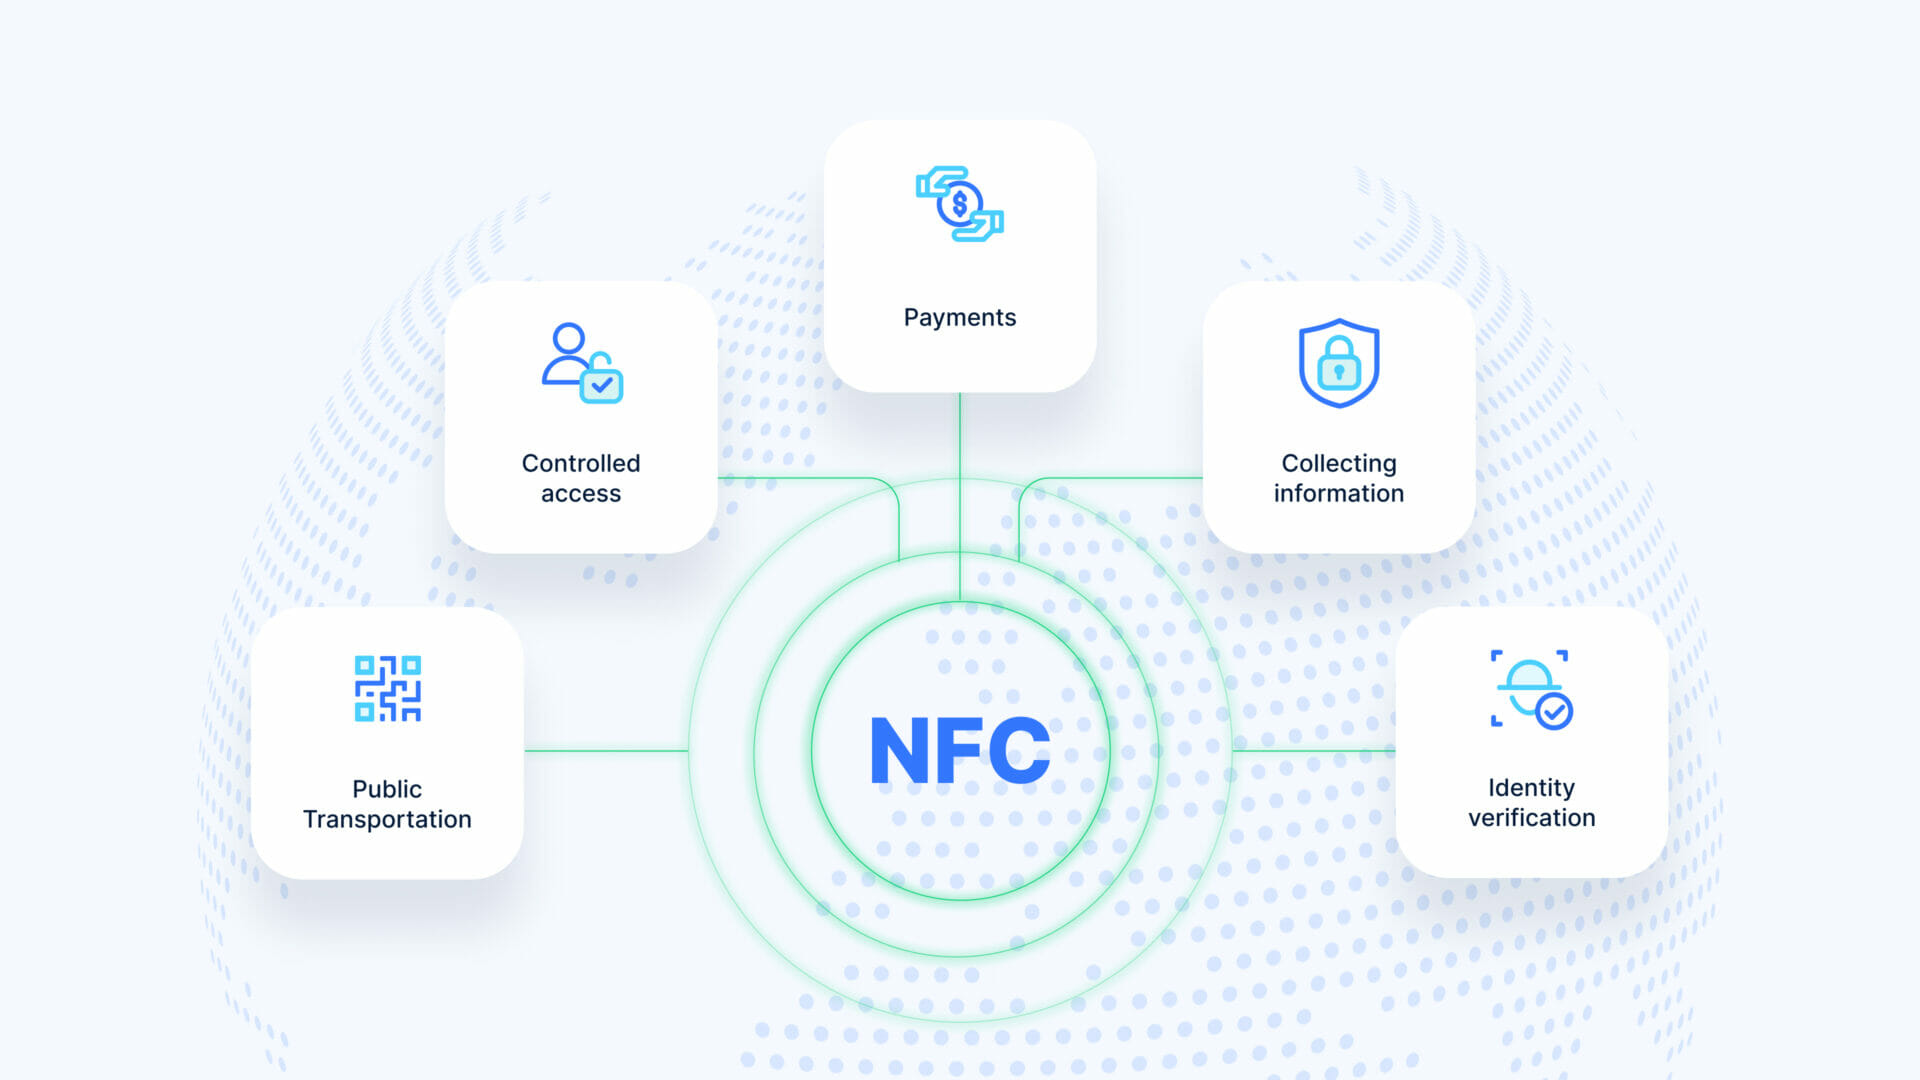 How can businesses use NFC